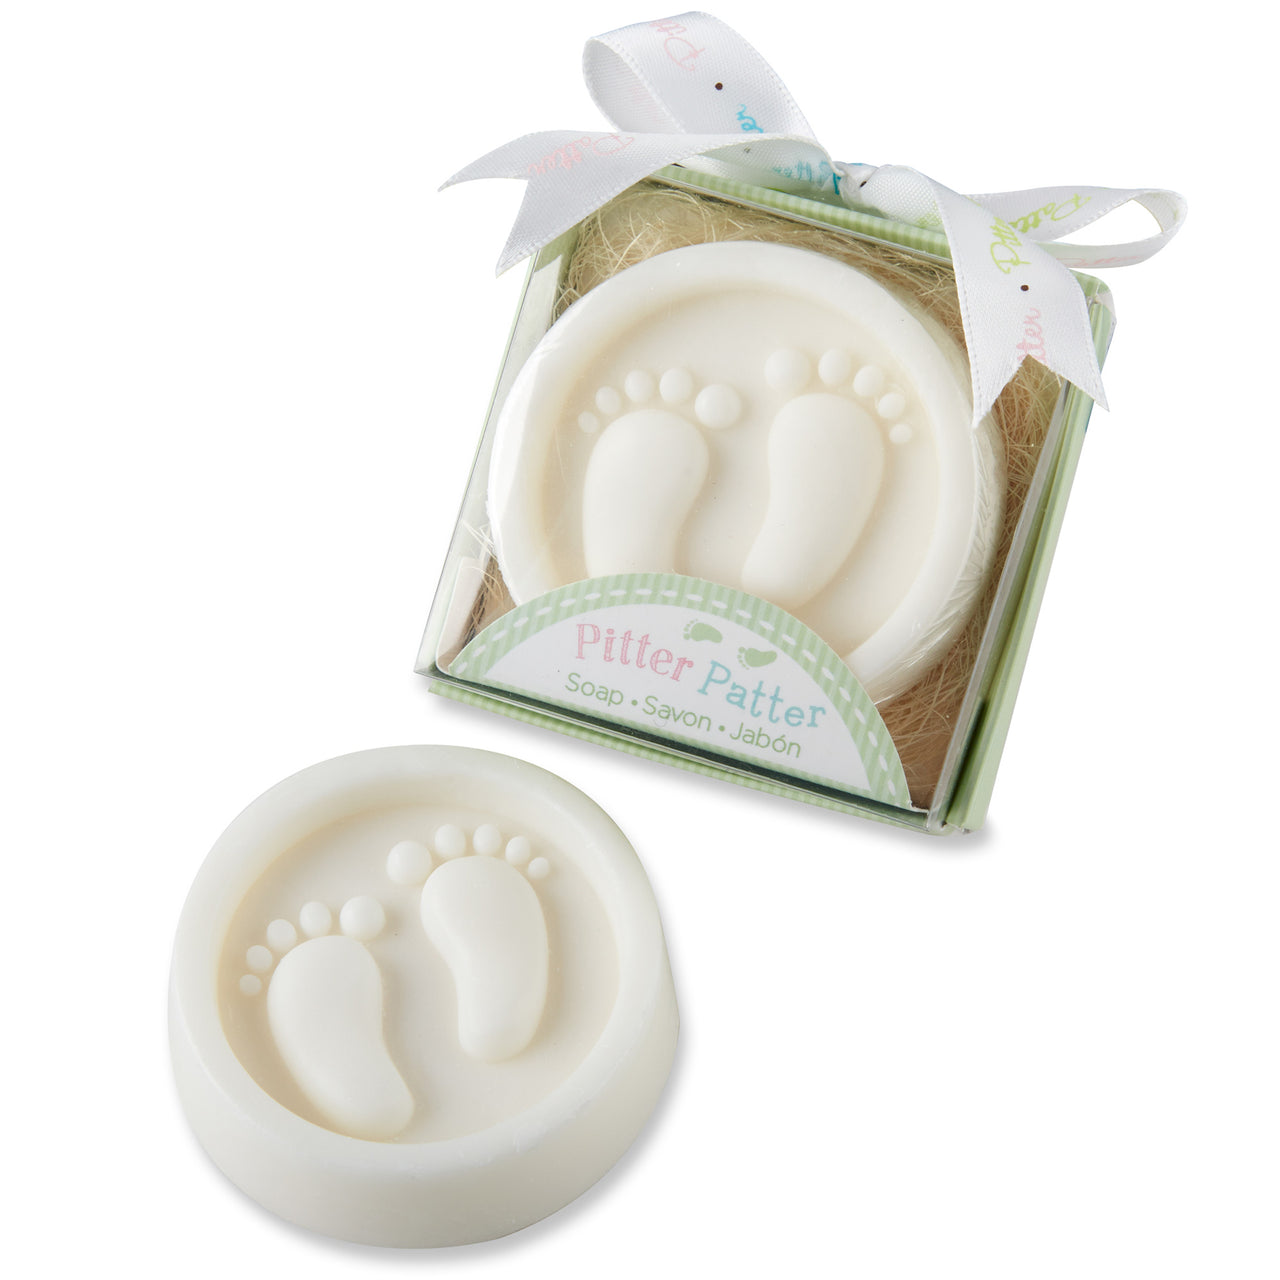 Pitter Patter Baby Shower Soap